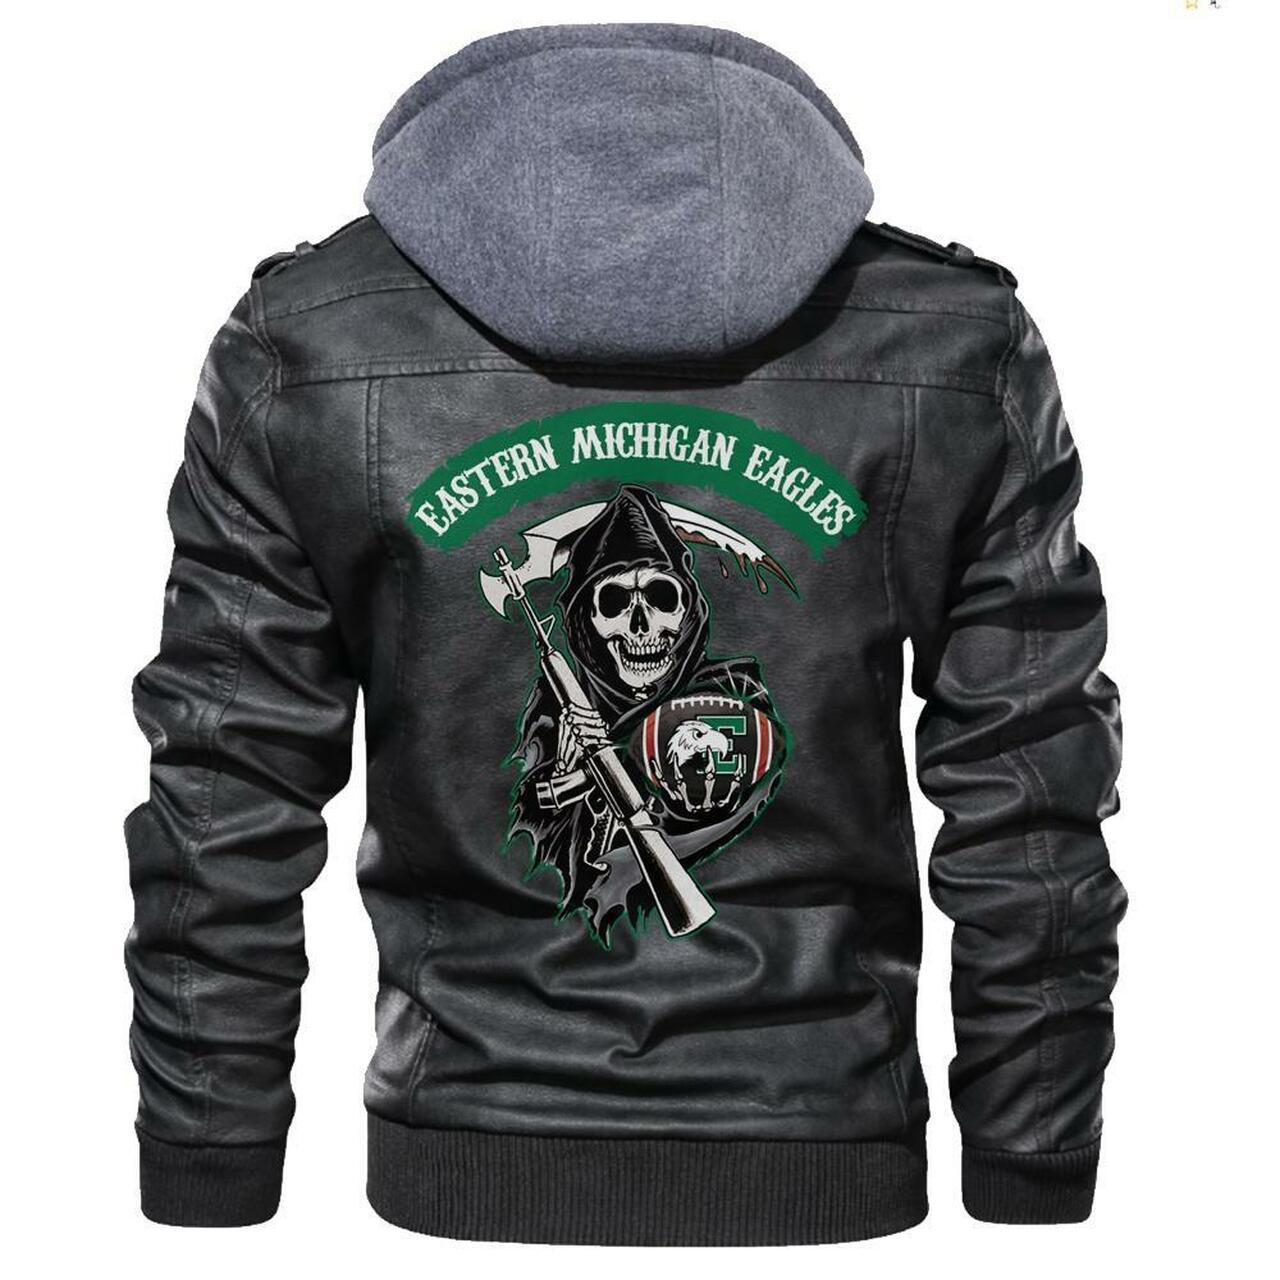 Check out and find the right leather jacket below 41